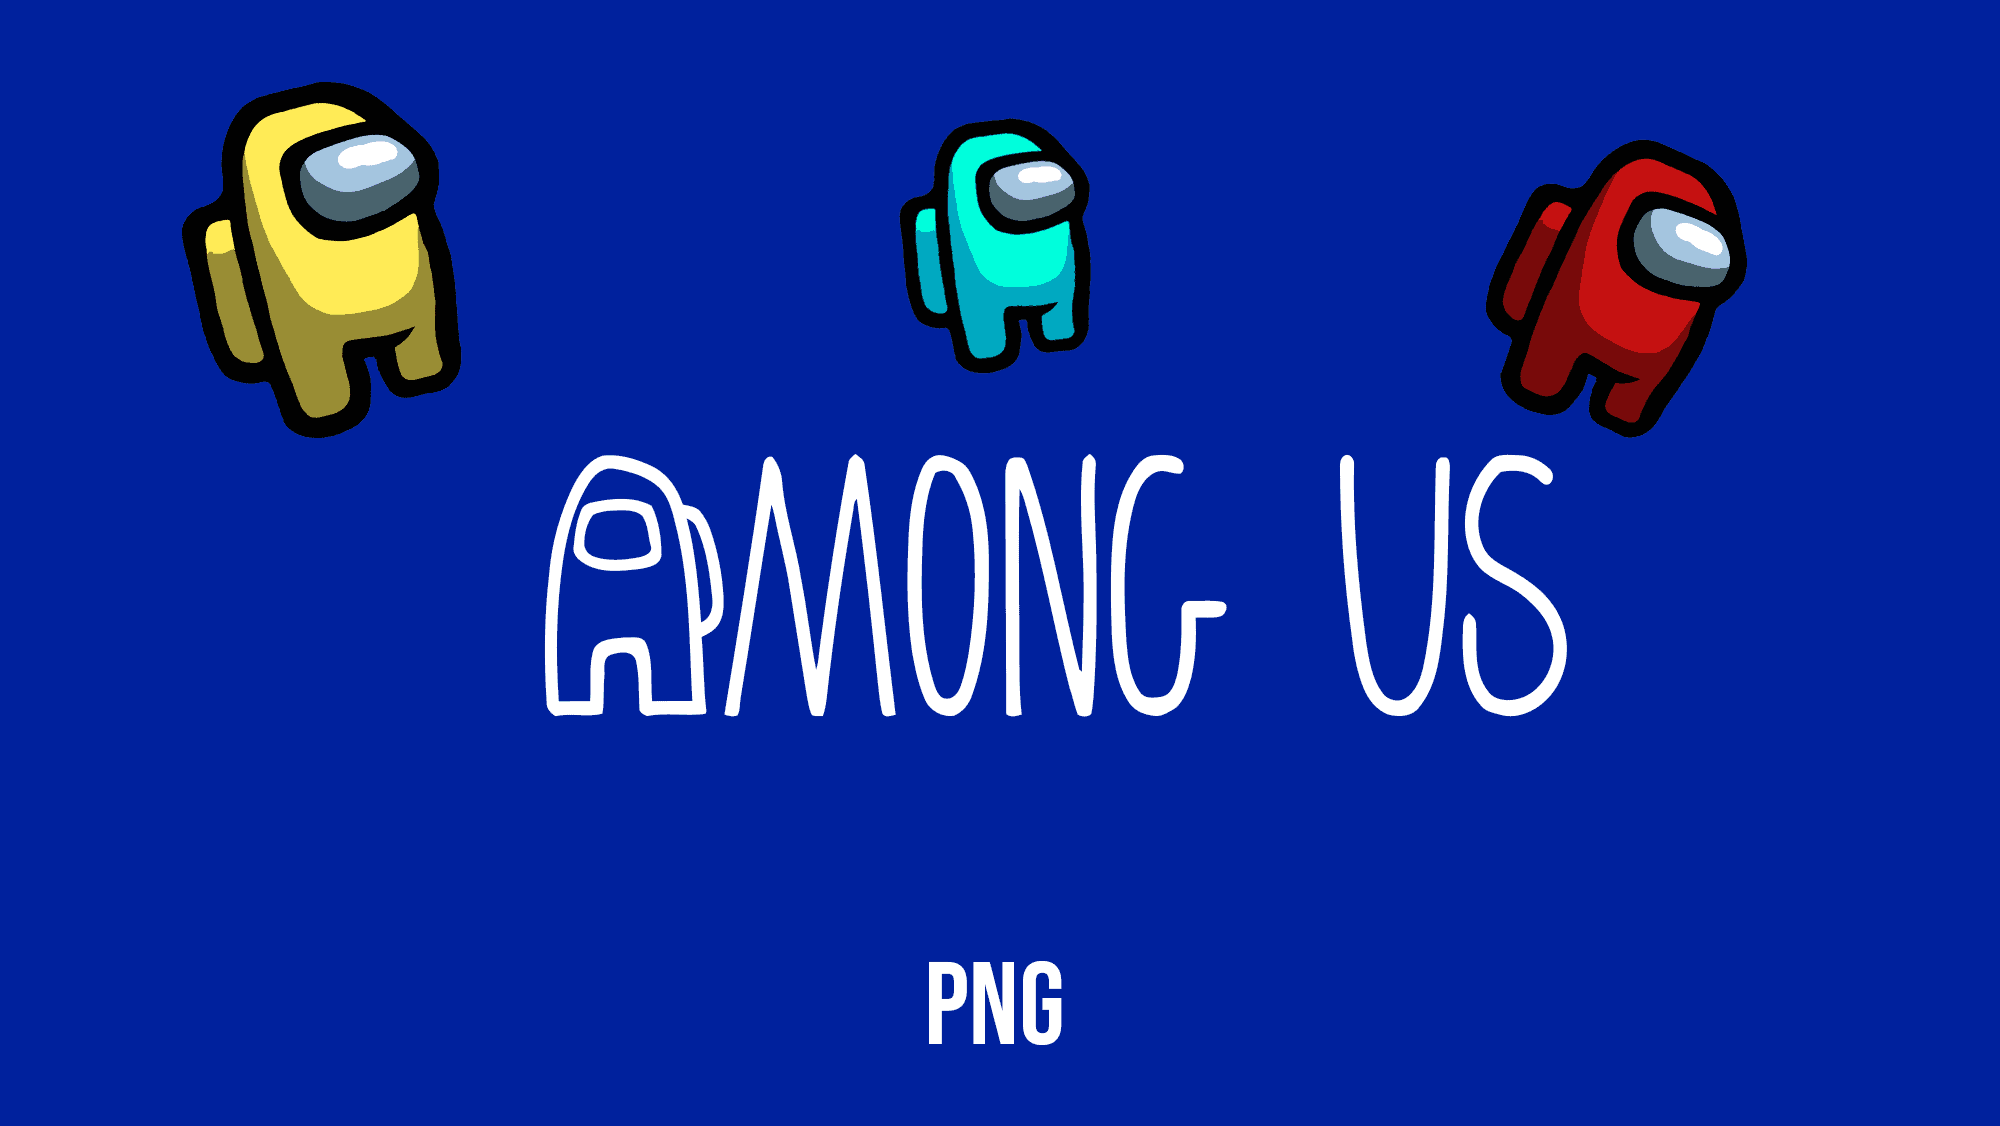 Among Us PNG [FREE] - Graphic Pie